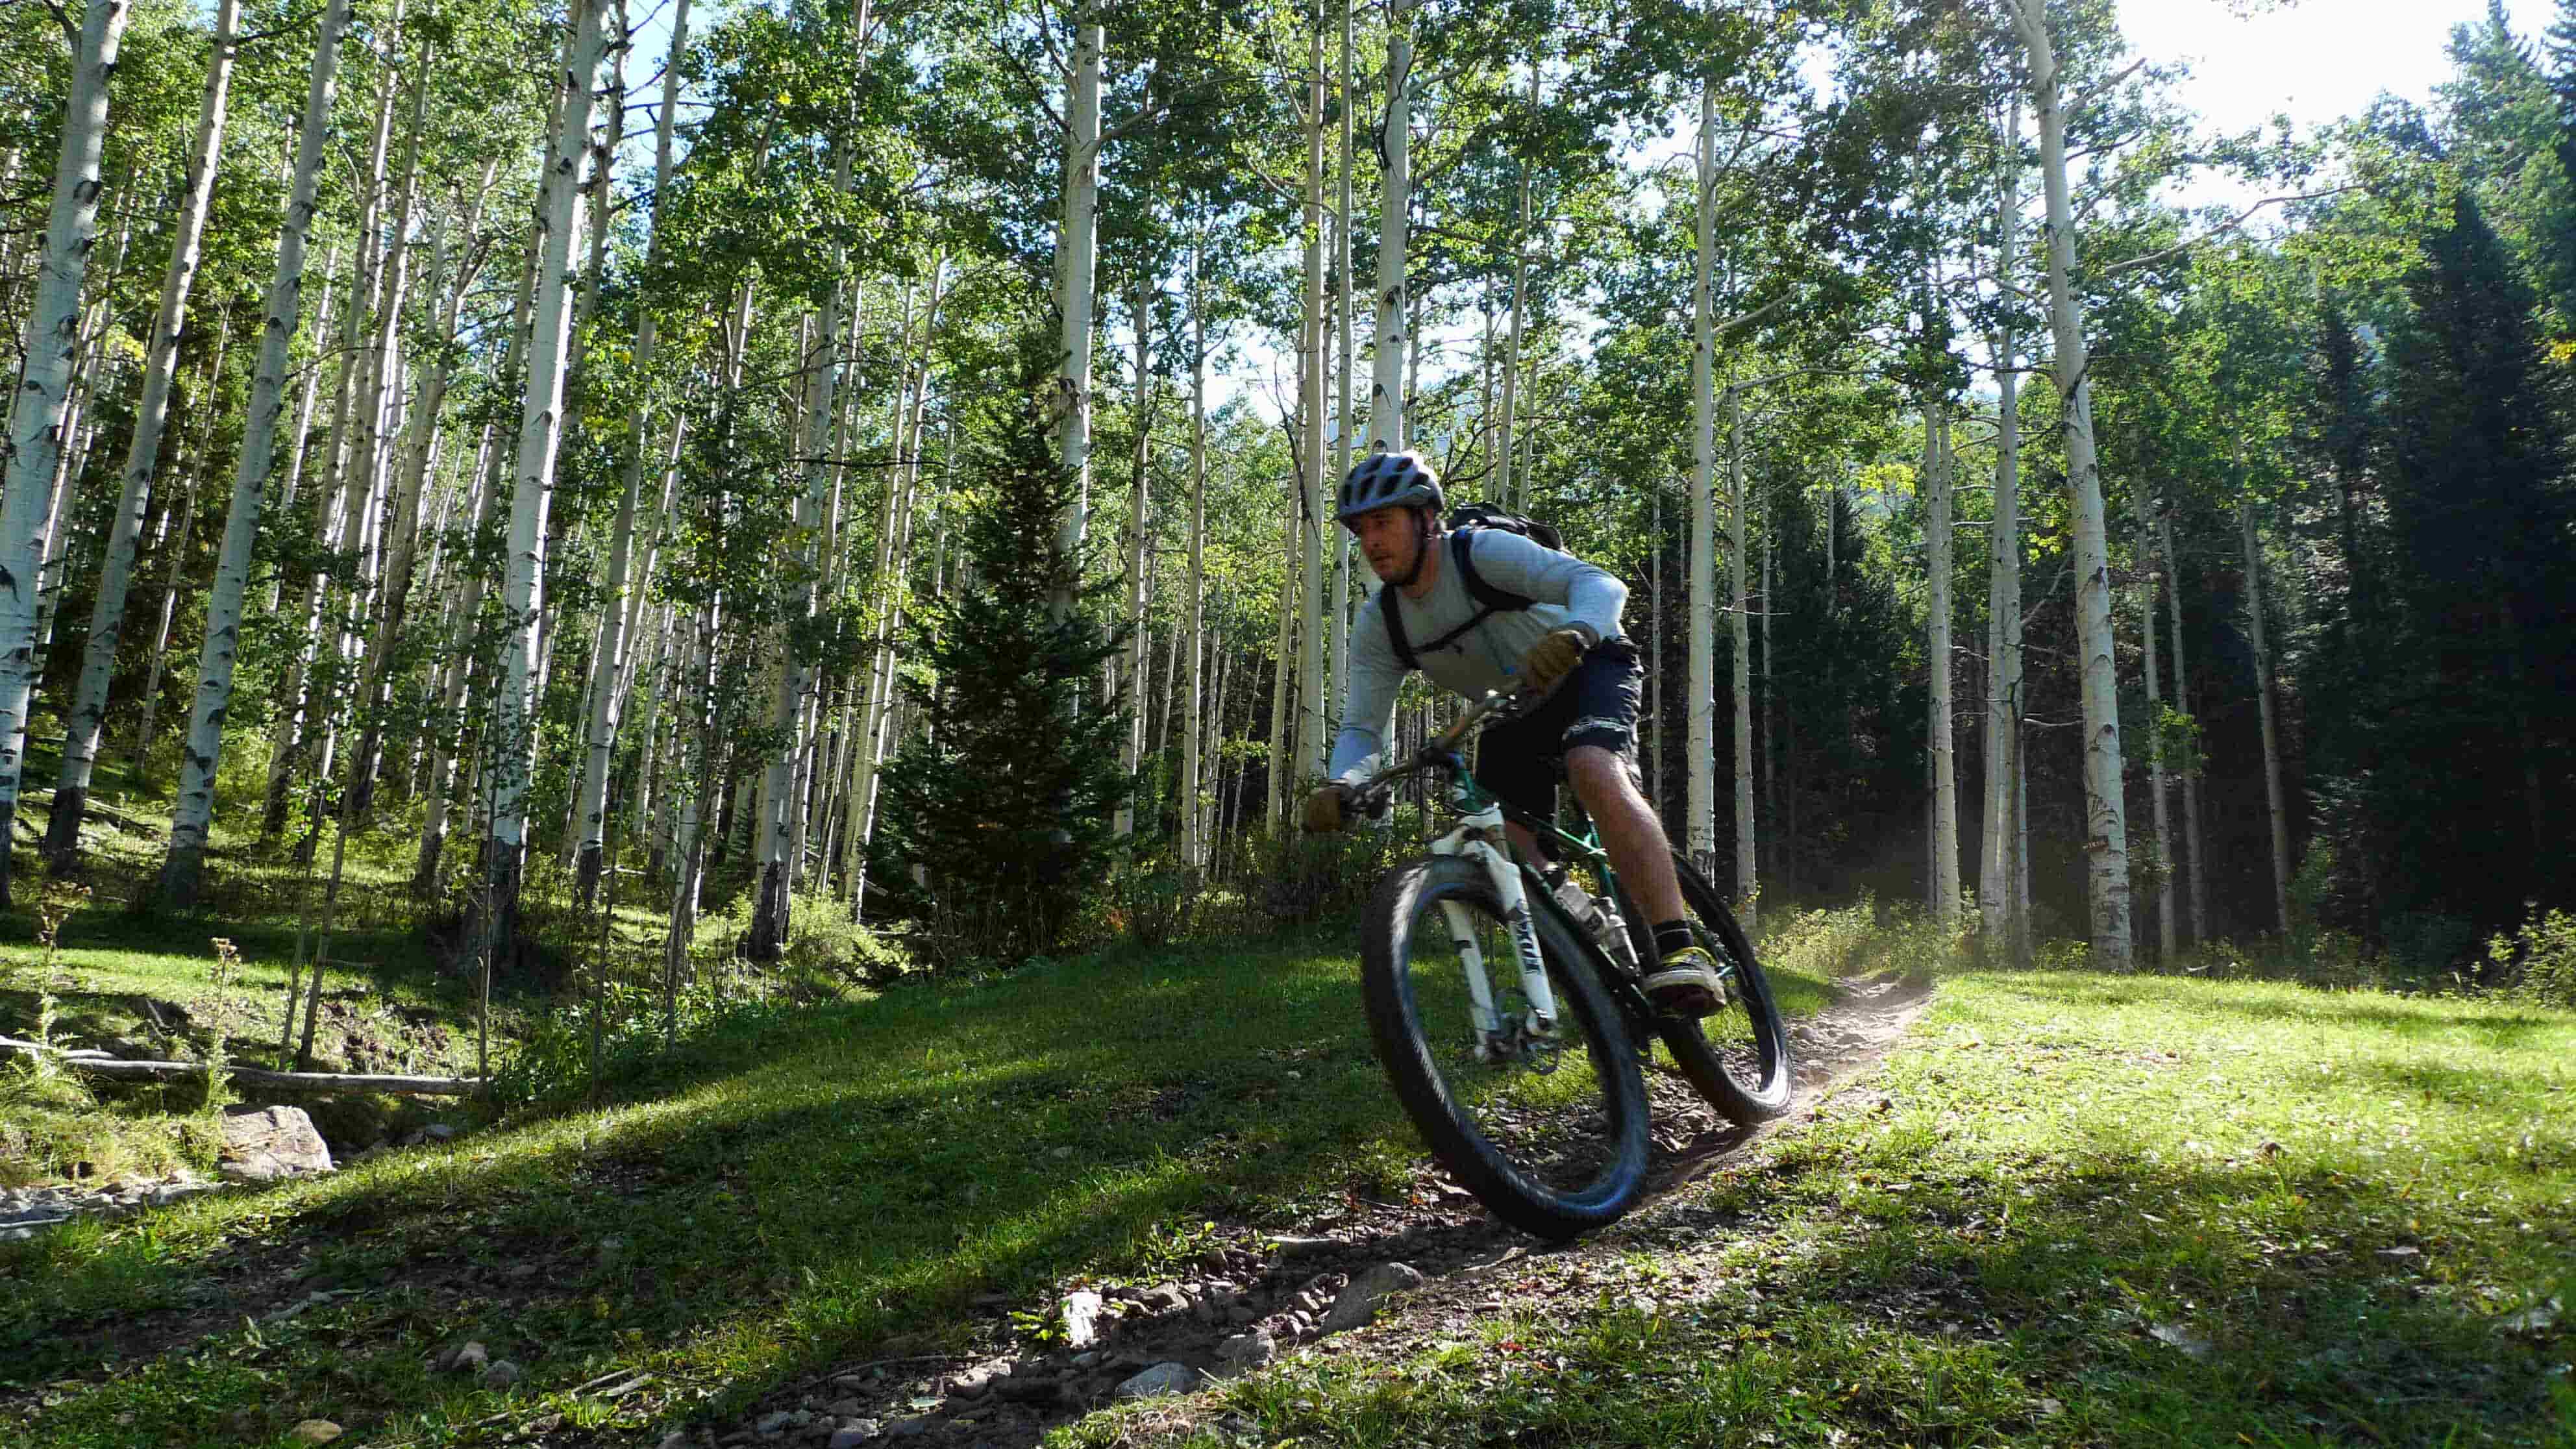 Front, left side view of a cyclist, riding a Surly bike on a dirt trail, in a grassy clearing in a forest